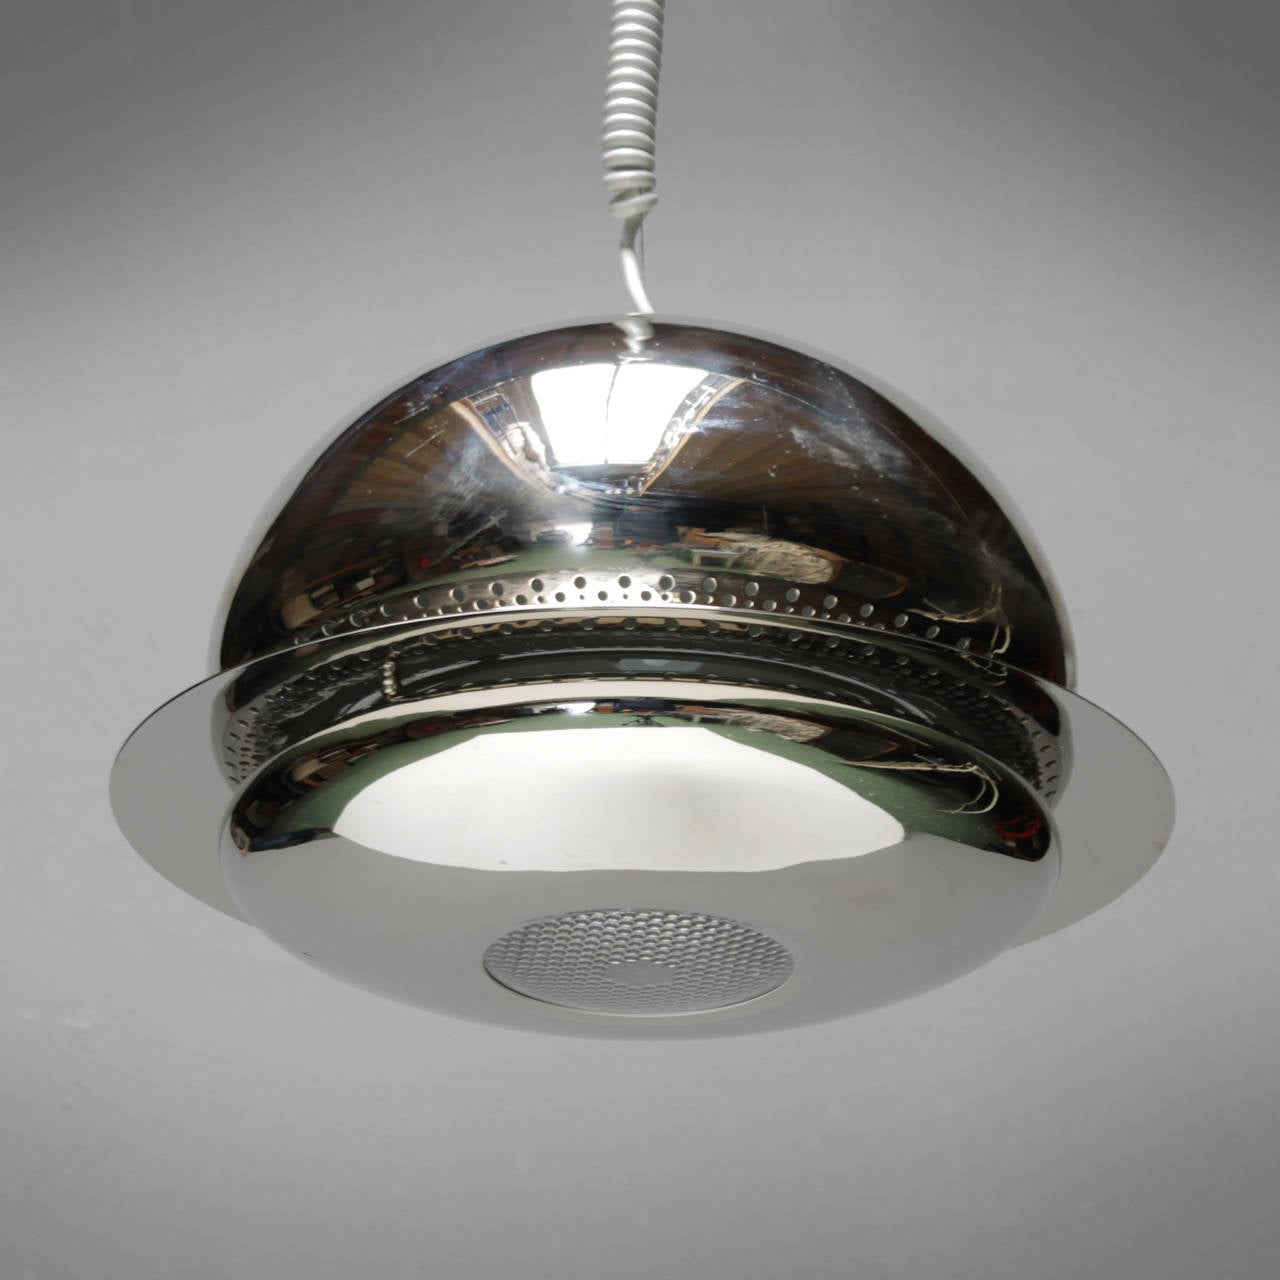 Unique Pendant Light by Afra & Tobia Scarpa. Like new, comes in original box. Chrome plated metal and glass diffuser lens.

The Nictea ceiling fixture was one of the first models ever produced by the famous Italian lighting company Flos.